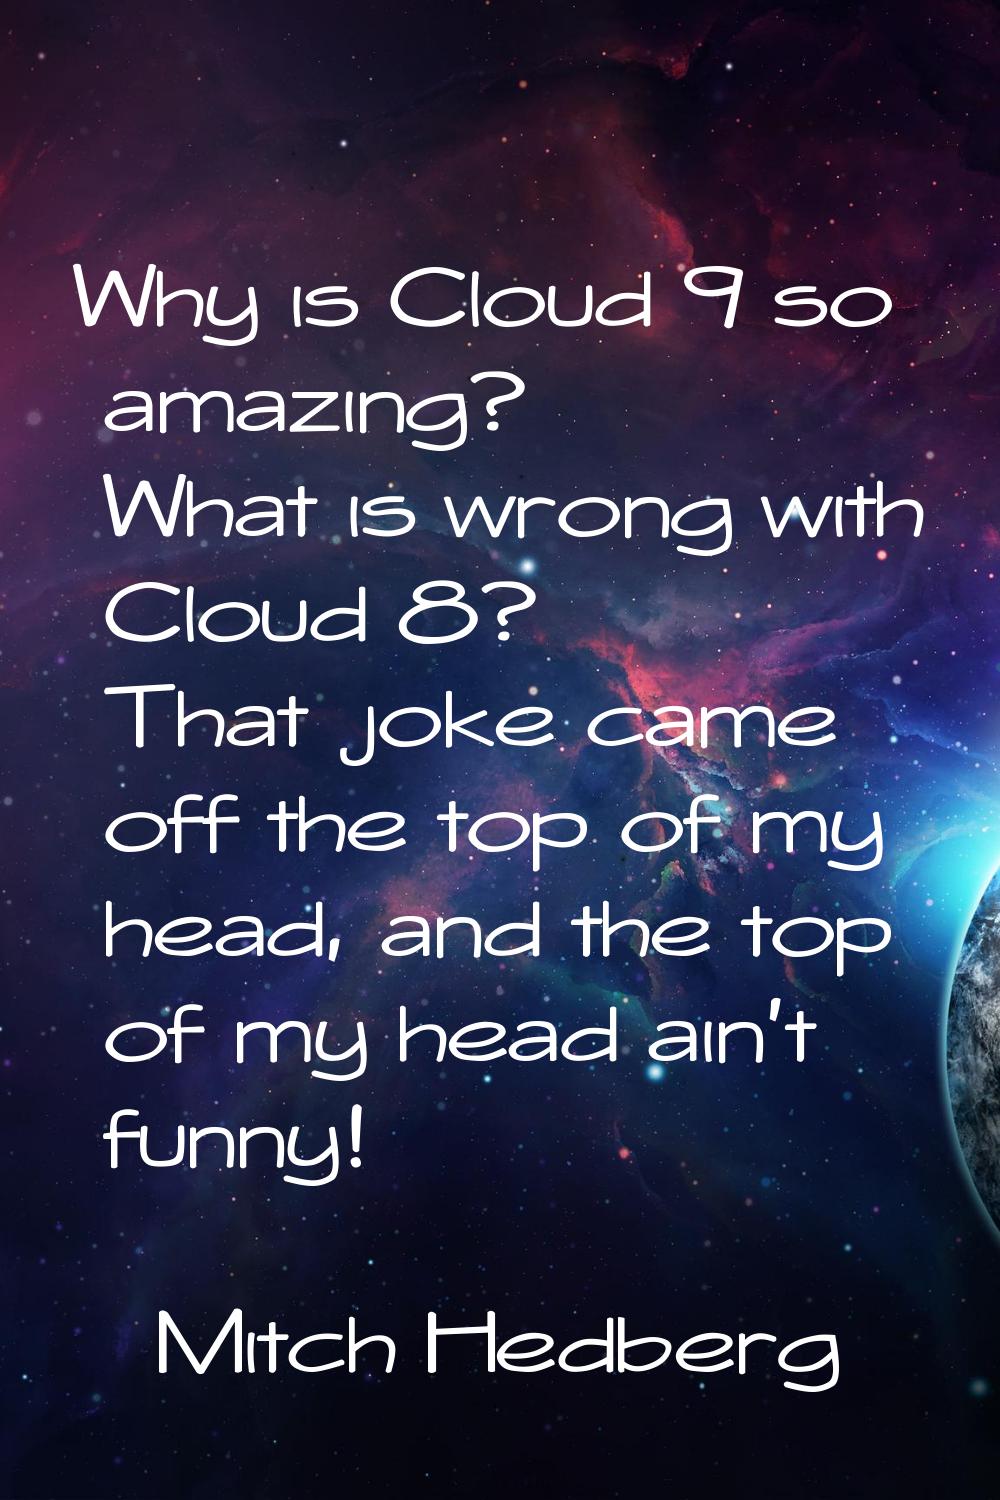 Why is Cloud 9 so amazing? What is wrong with Cloud 8? That joke came off the top of my head, and t